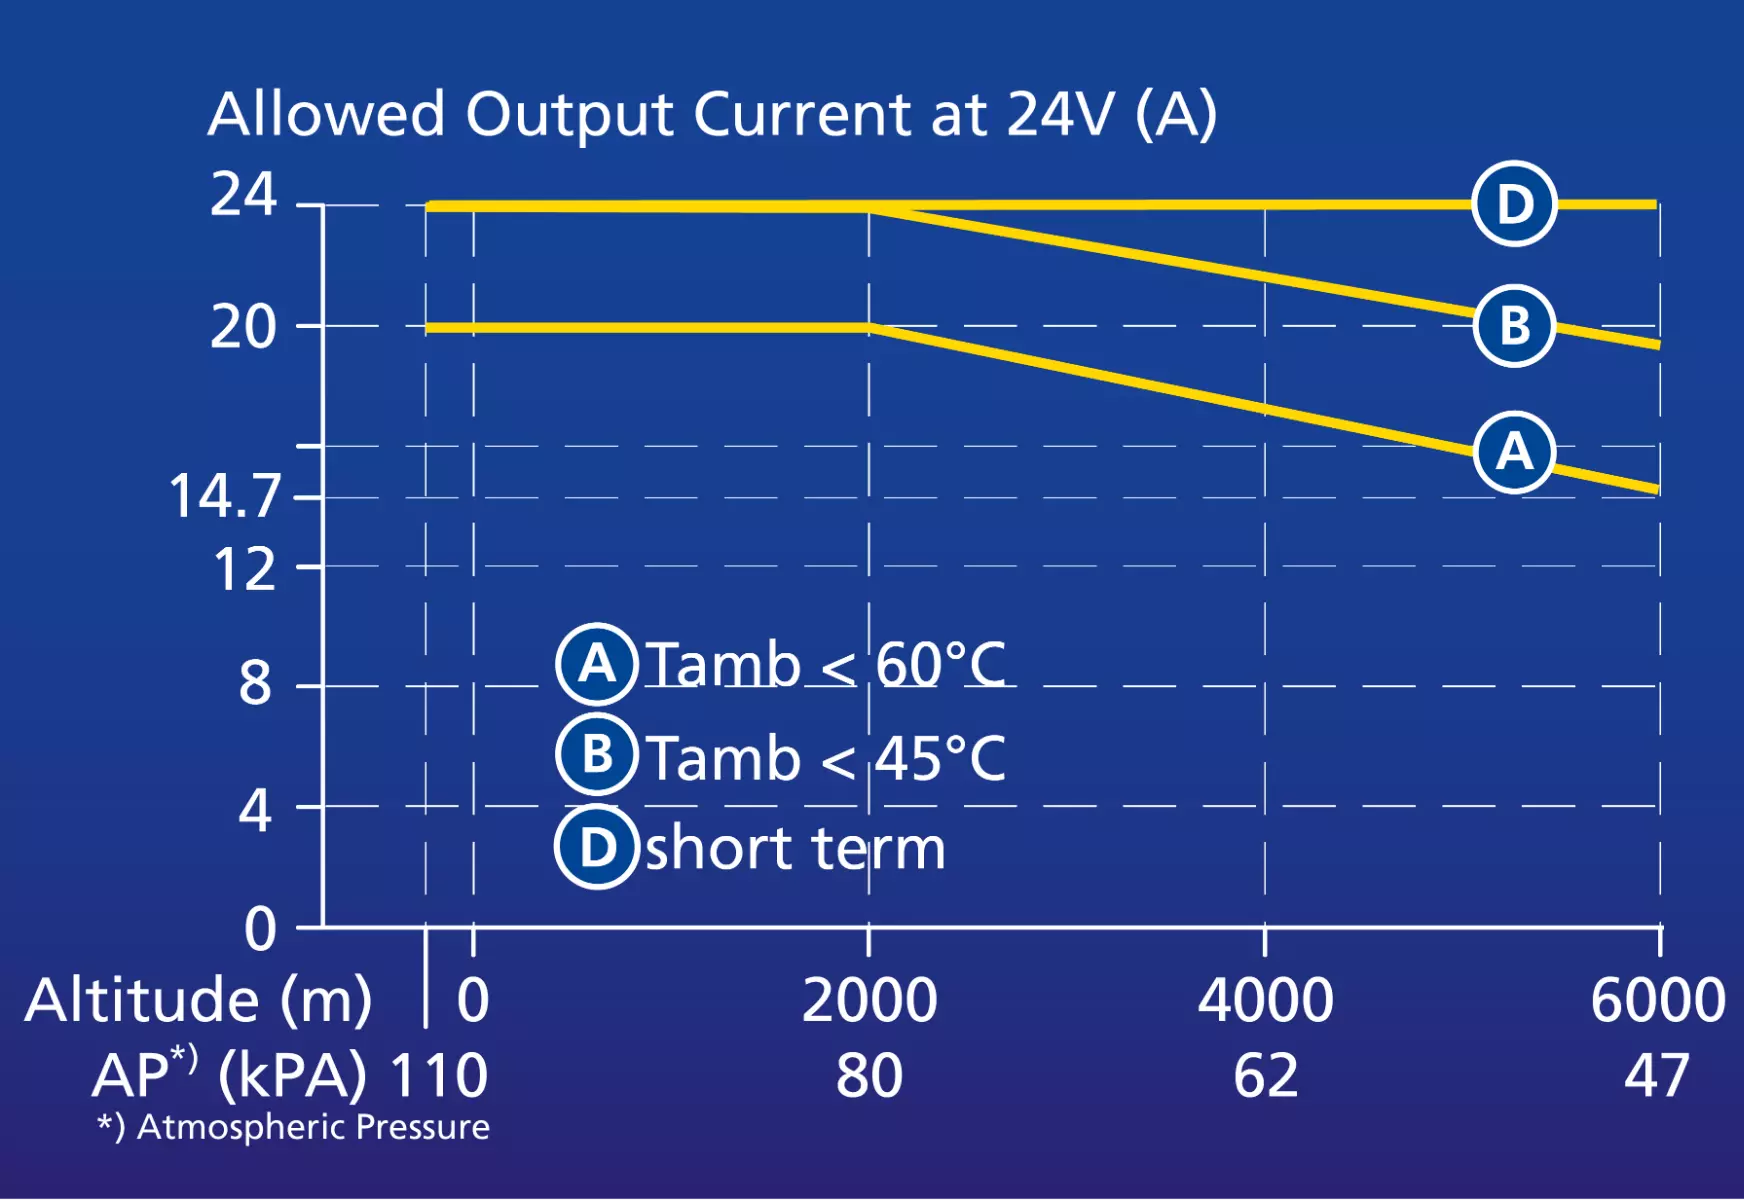 Derating curves for output current related to the altitude.